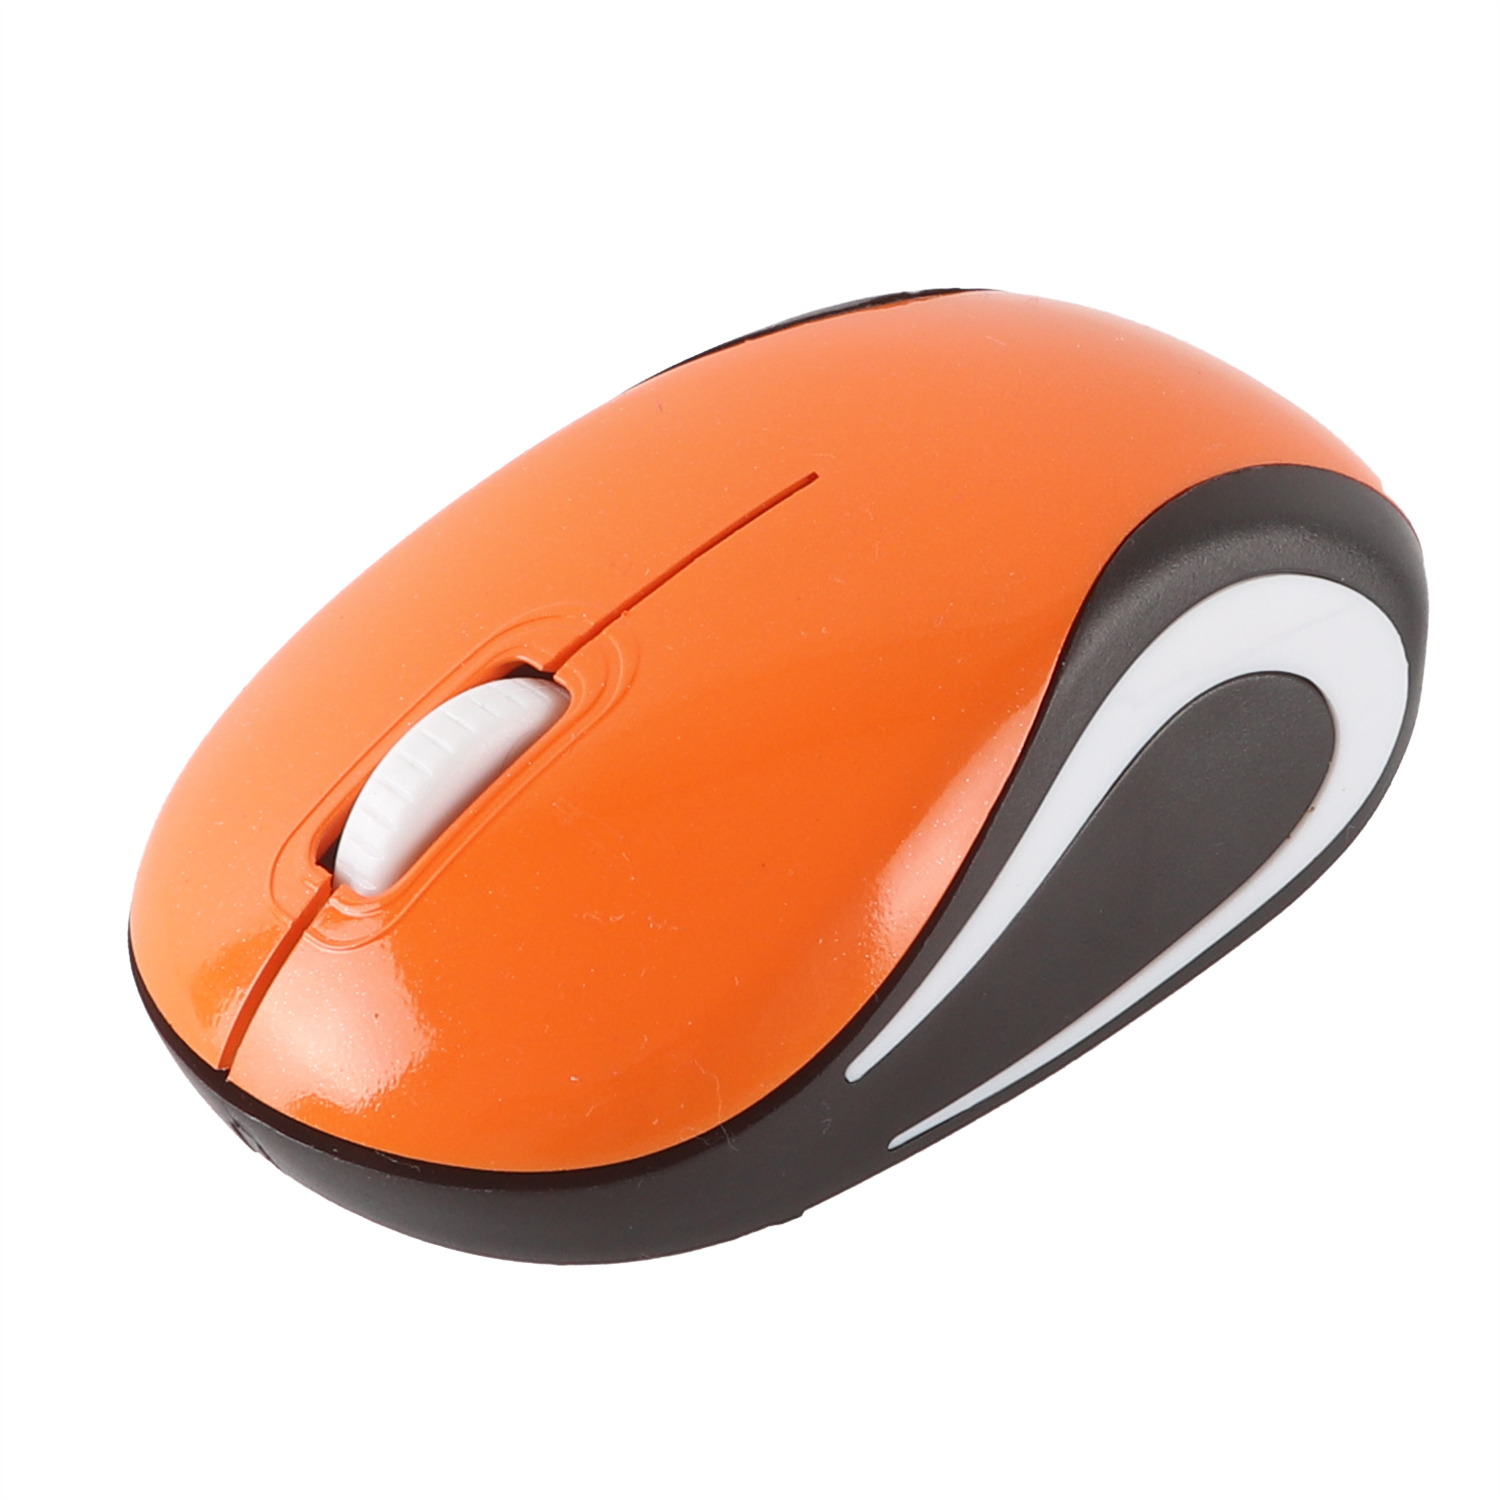 Mini-Wireless-mouse-for-Computer-2-4Ghz-Gaming-Small-Mause-1600-DPI-Optical-USB-Ergonomic-USB (9)